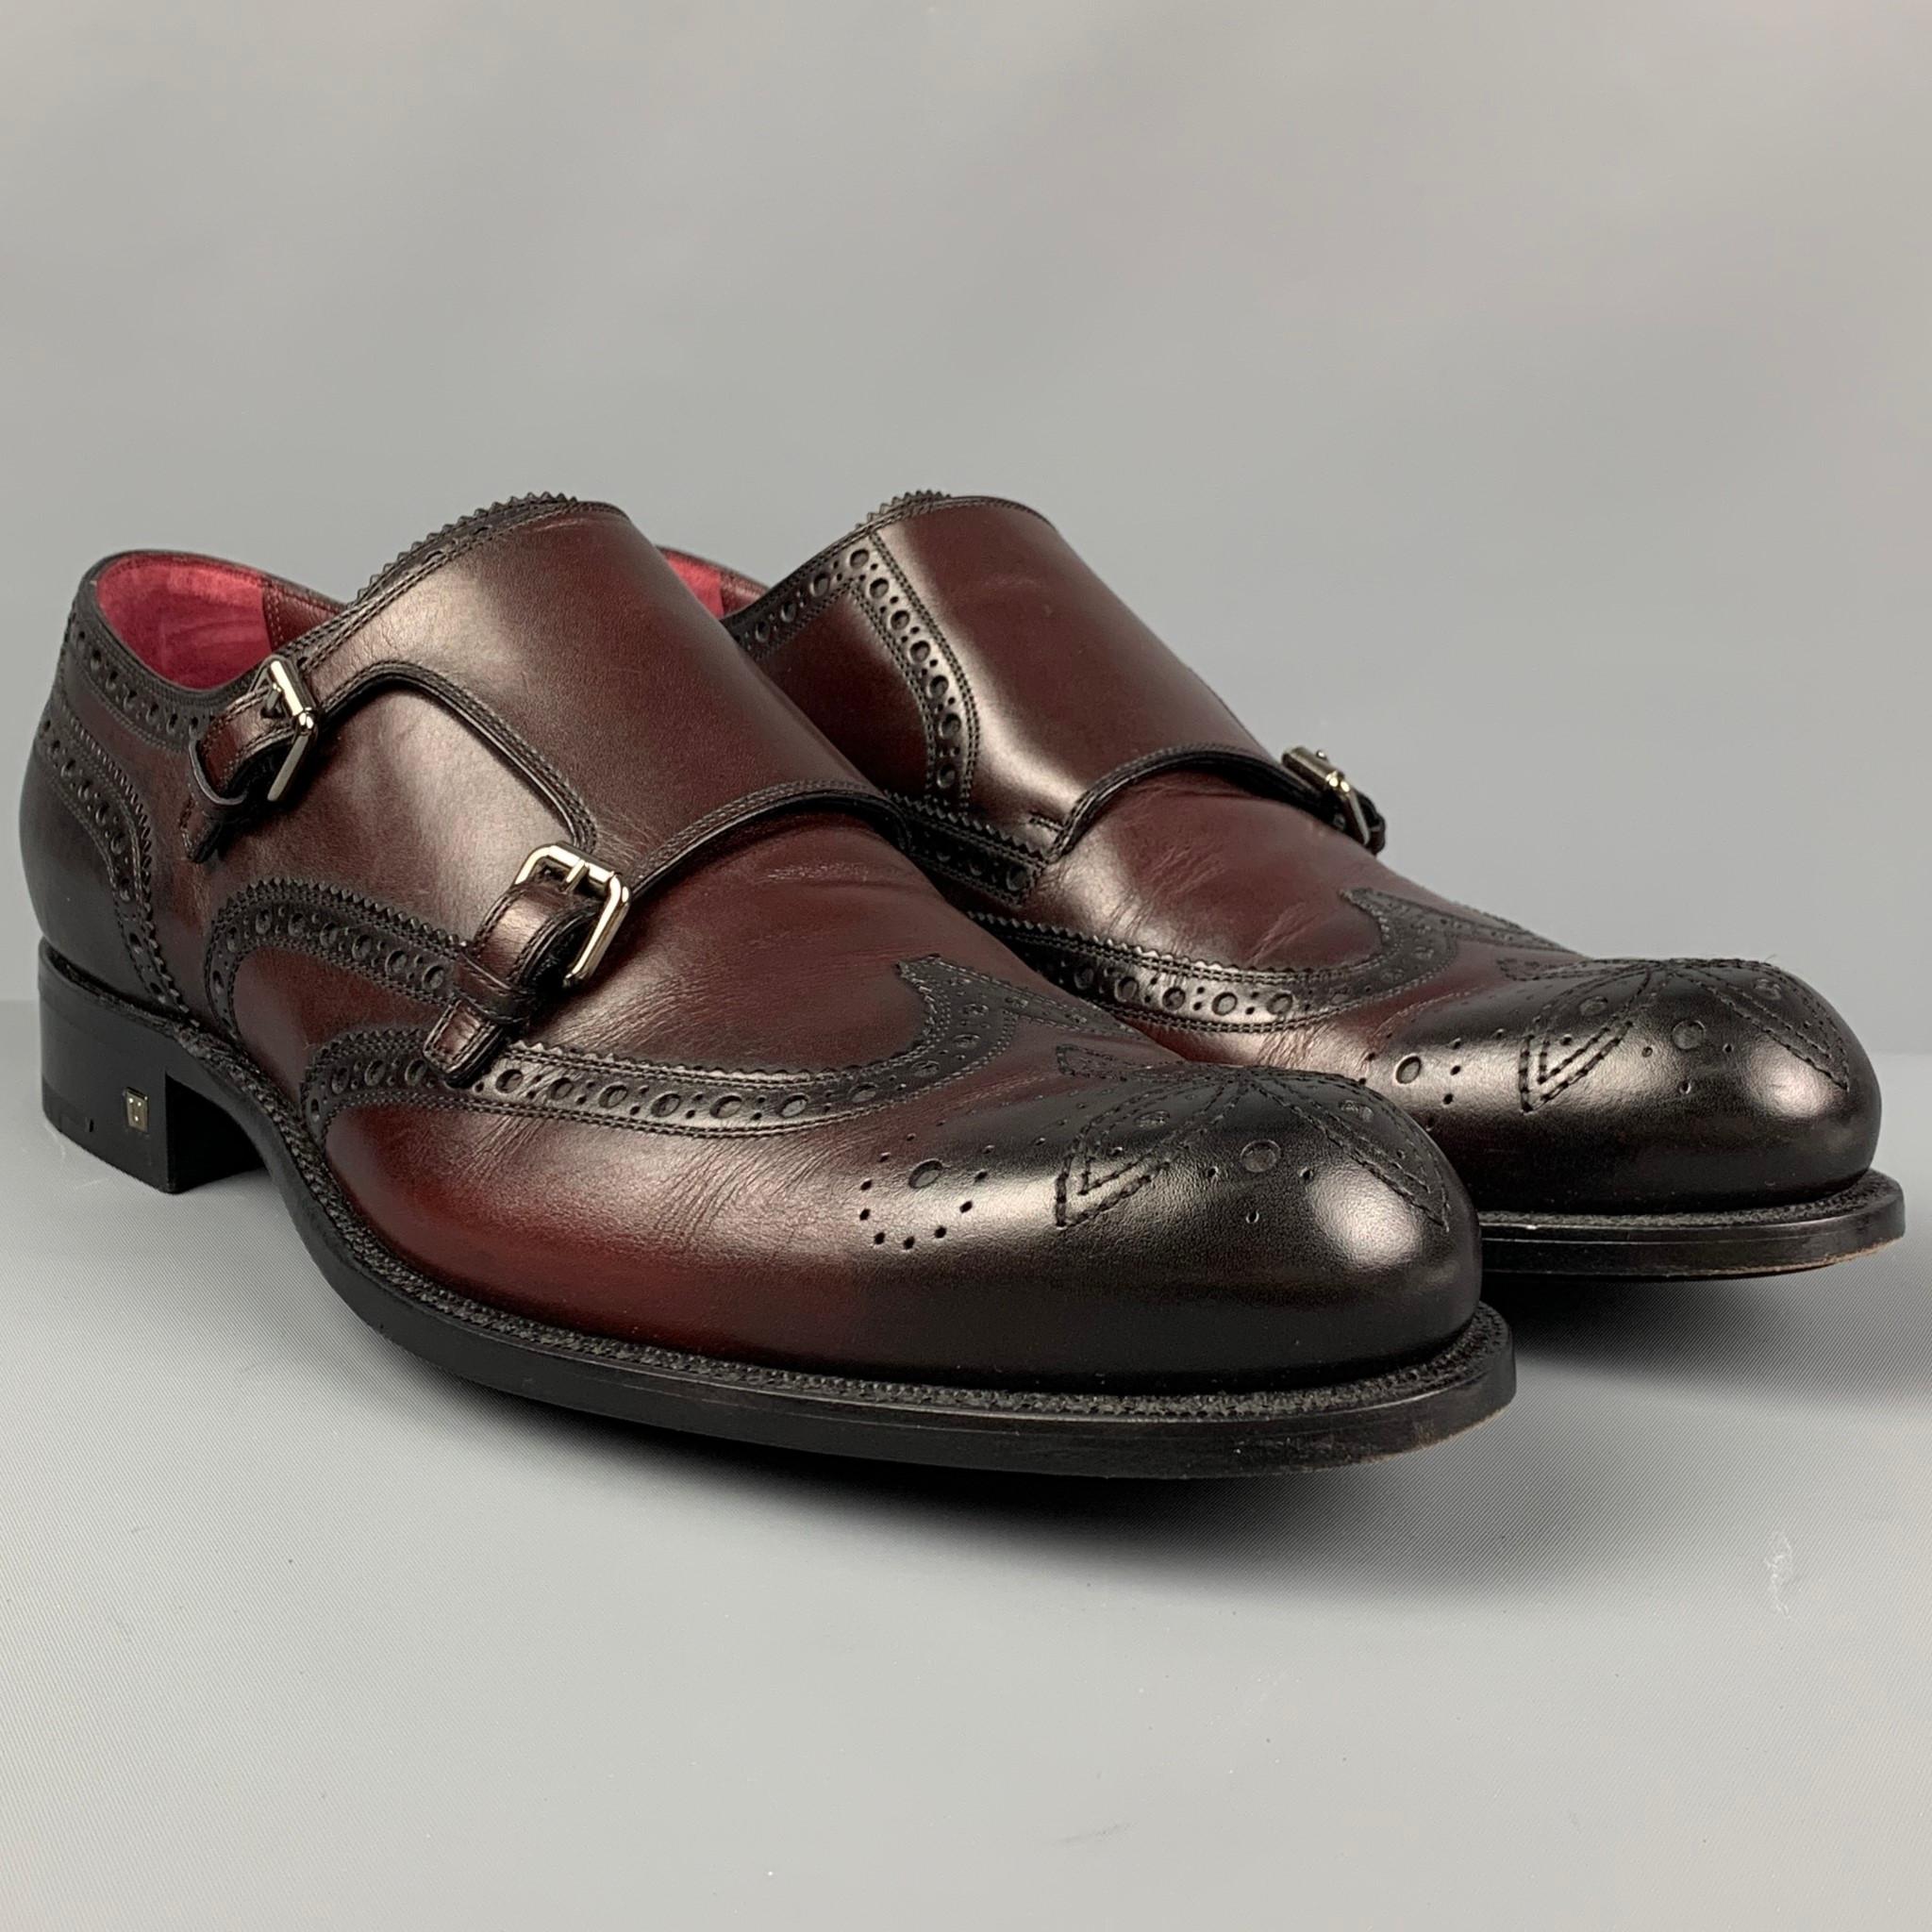 LOUIS VUITTON loafers comes in a burgundy antique leather featuring a wingtip style and a double monk strap closure. Made in Italy. 

Very Good Pre-Owned Condition.
Marked: MT 0162 10

Outsole: 12.5 in. x 4 in. 